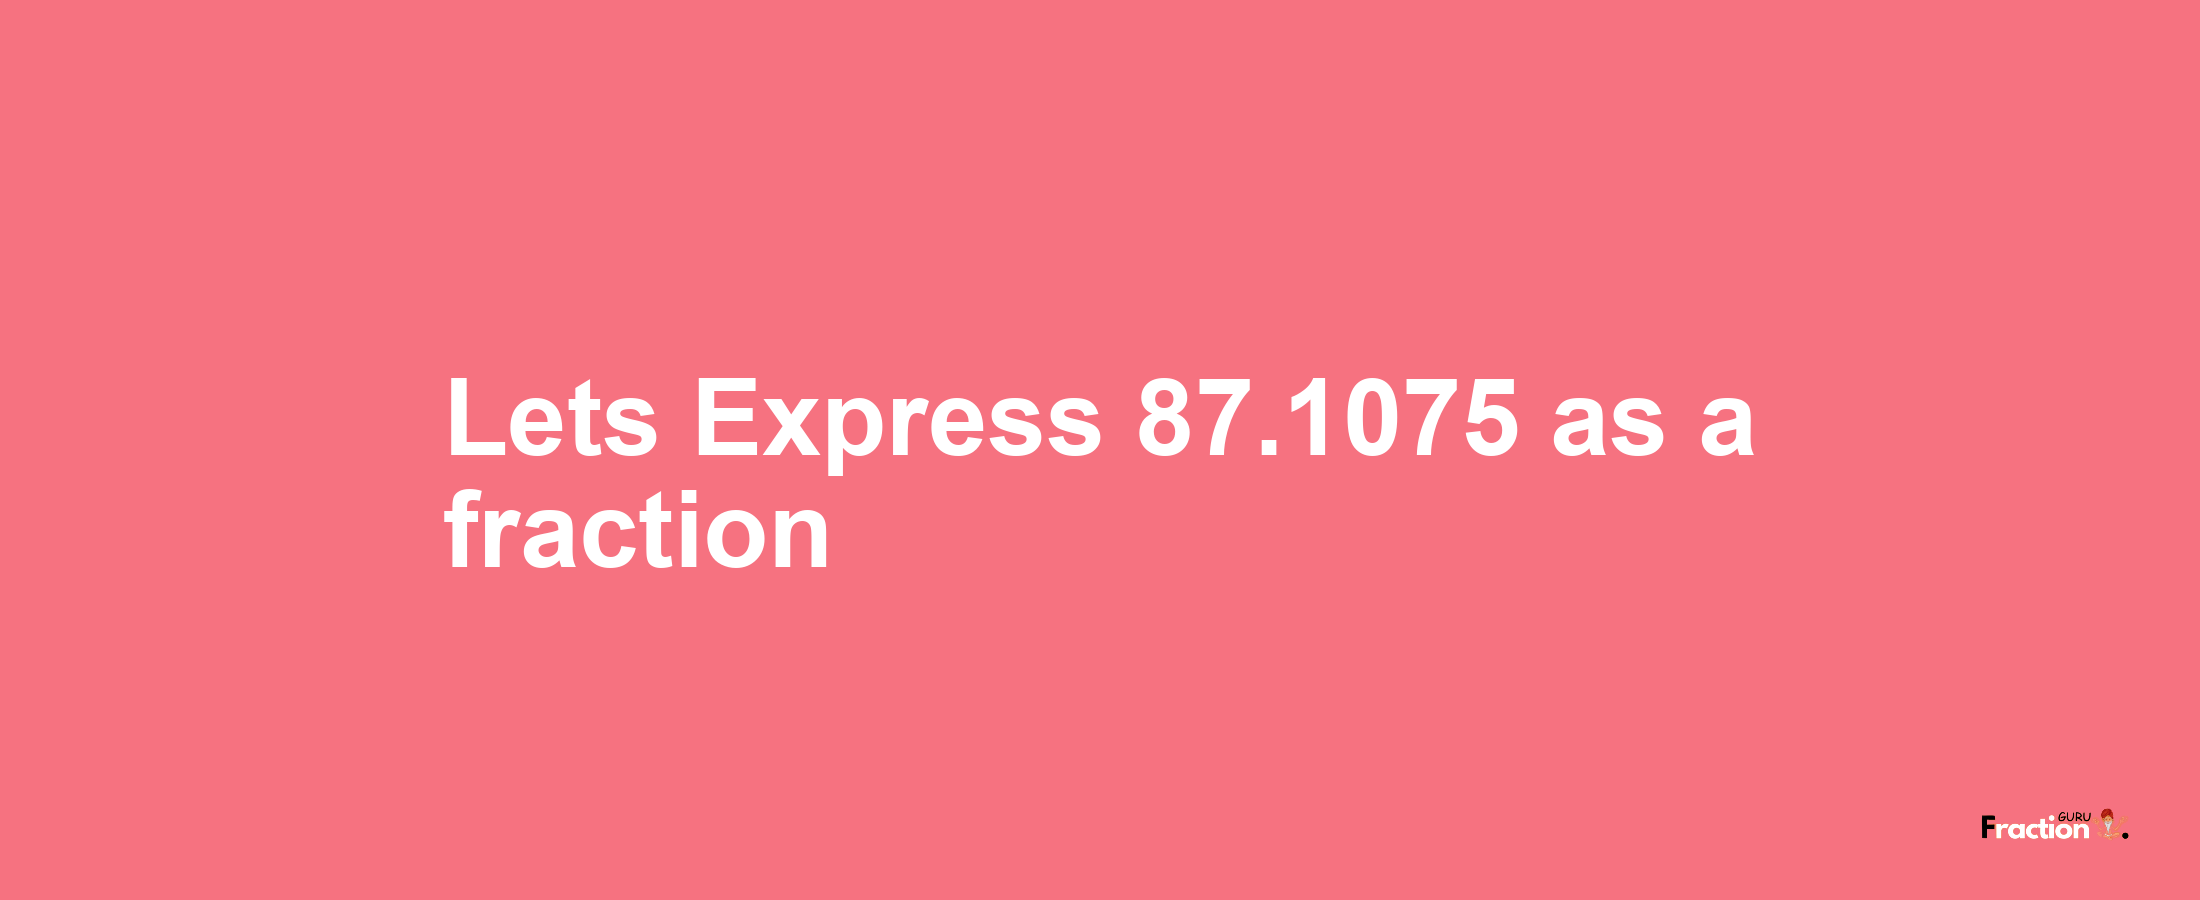 Lets Express 87.1075 as afraction